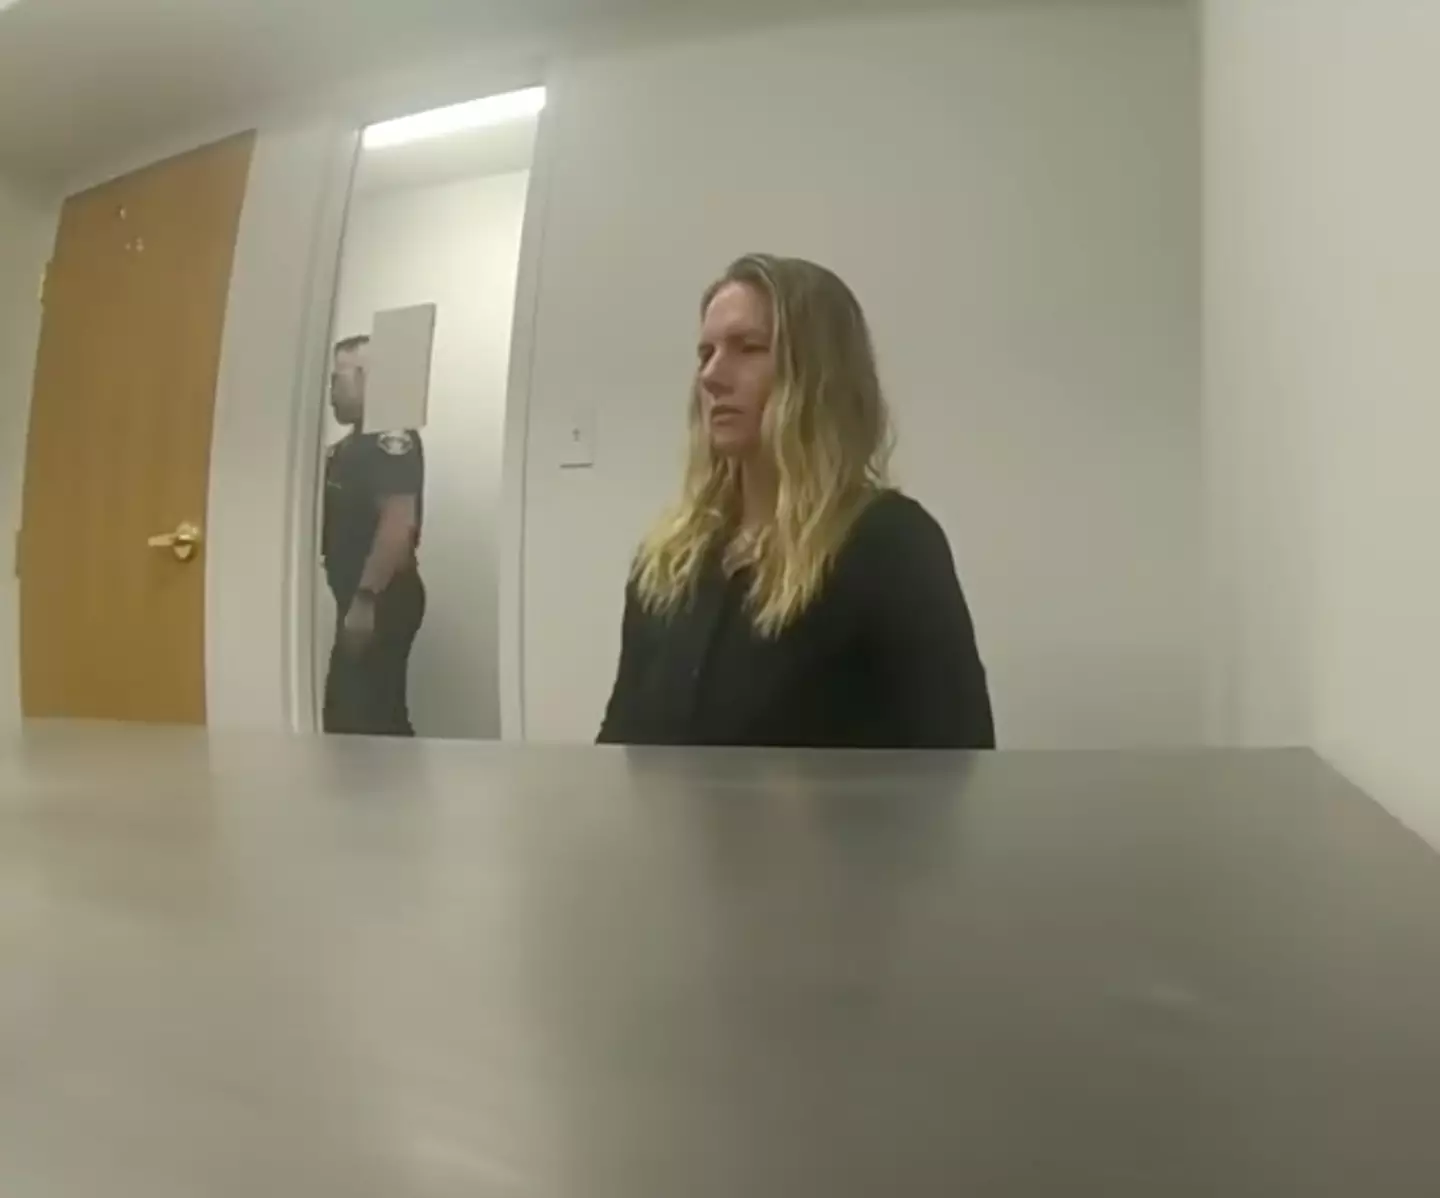 During the police interview, the officers ask her several questions about her children and the mother refuses to comment.